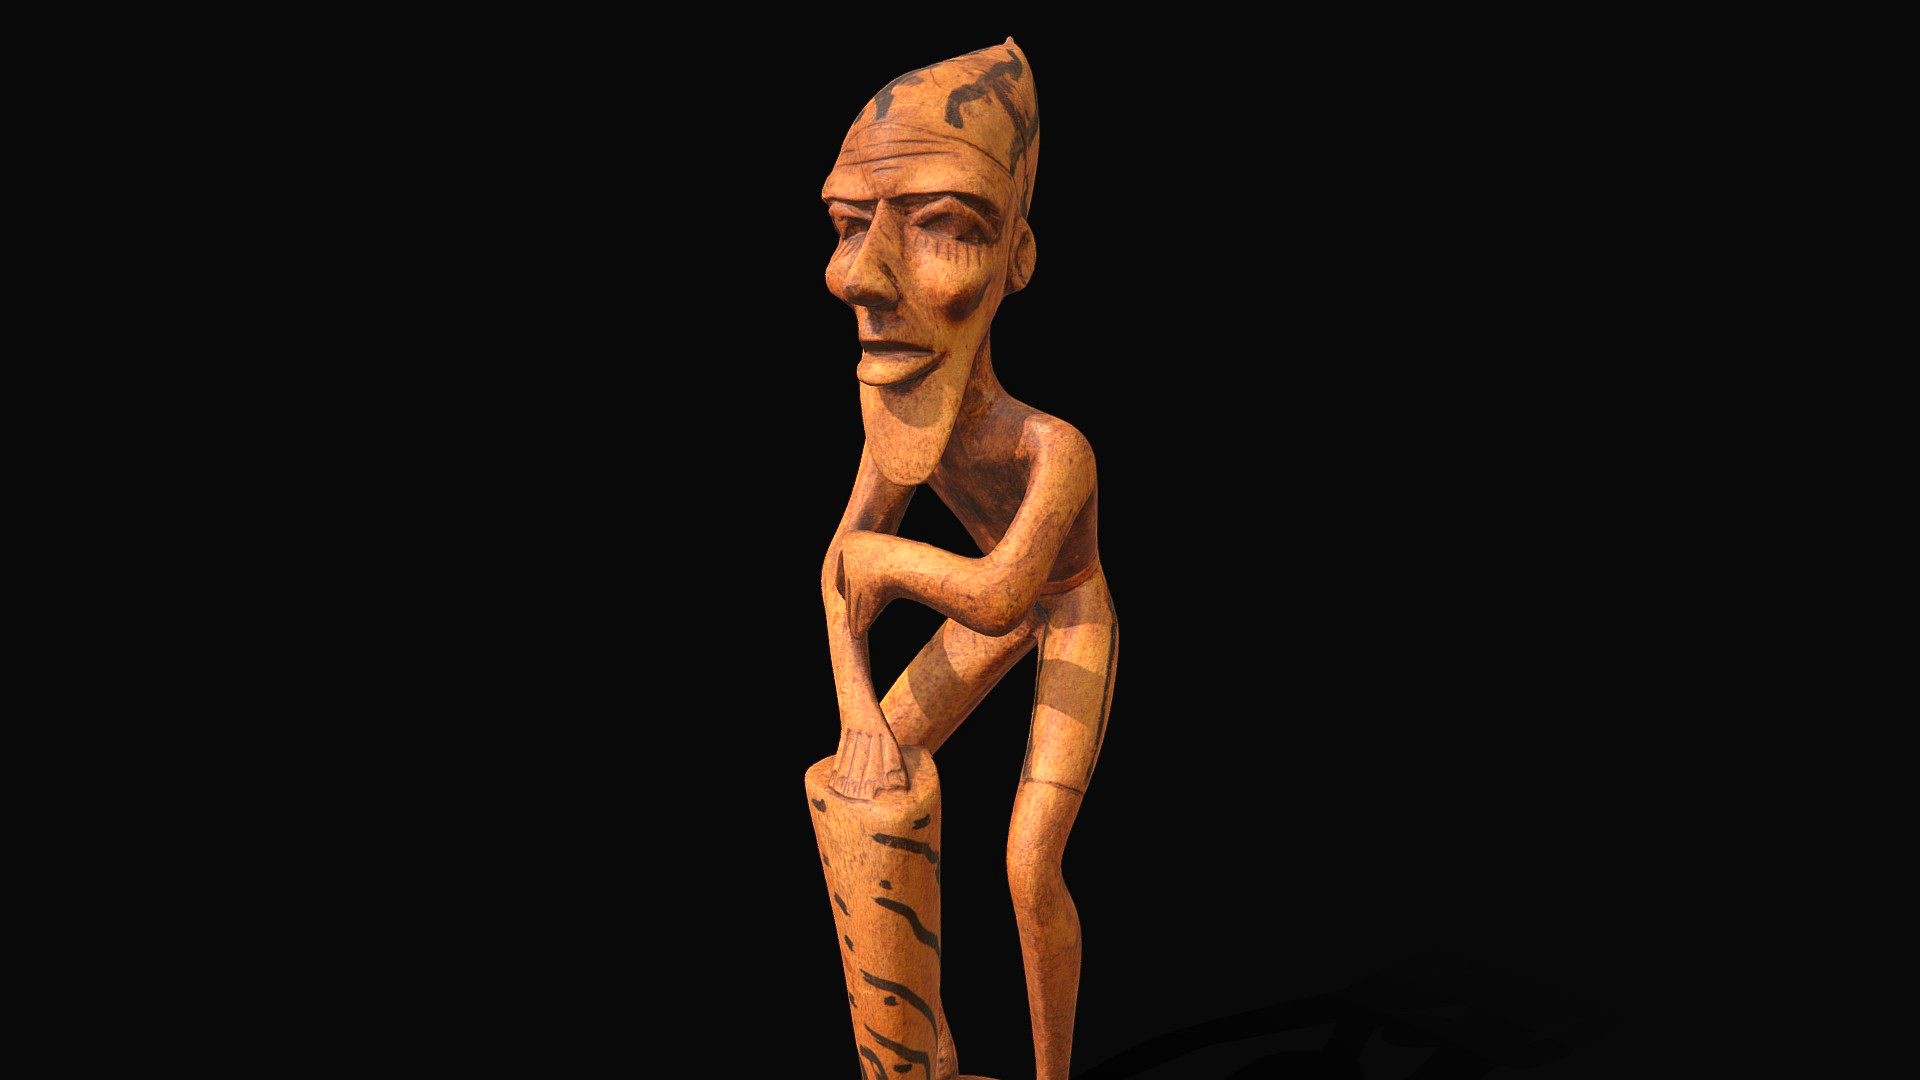 Wooden carving from Tanzania, Africa